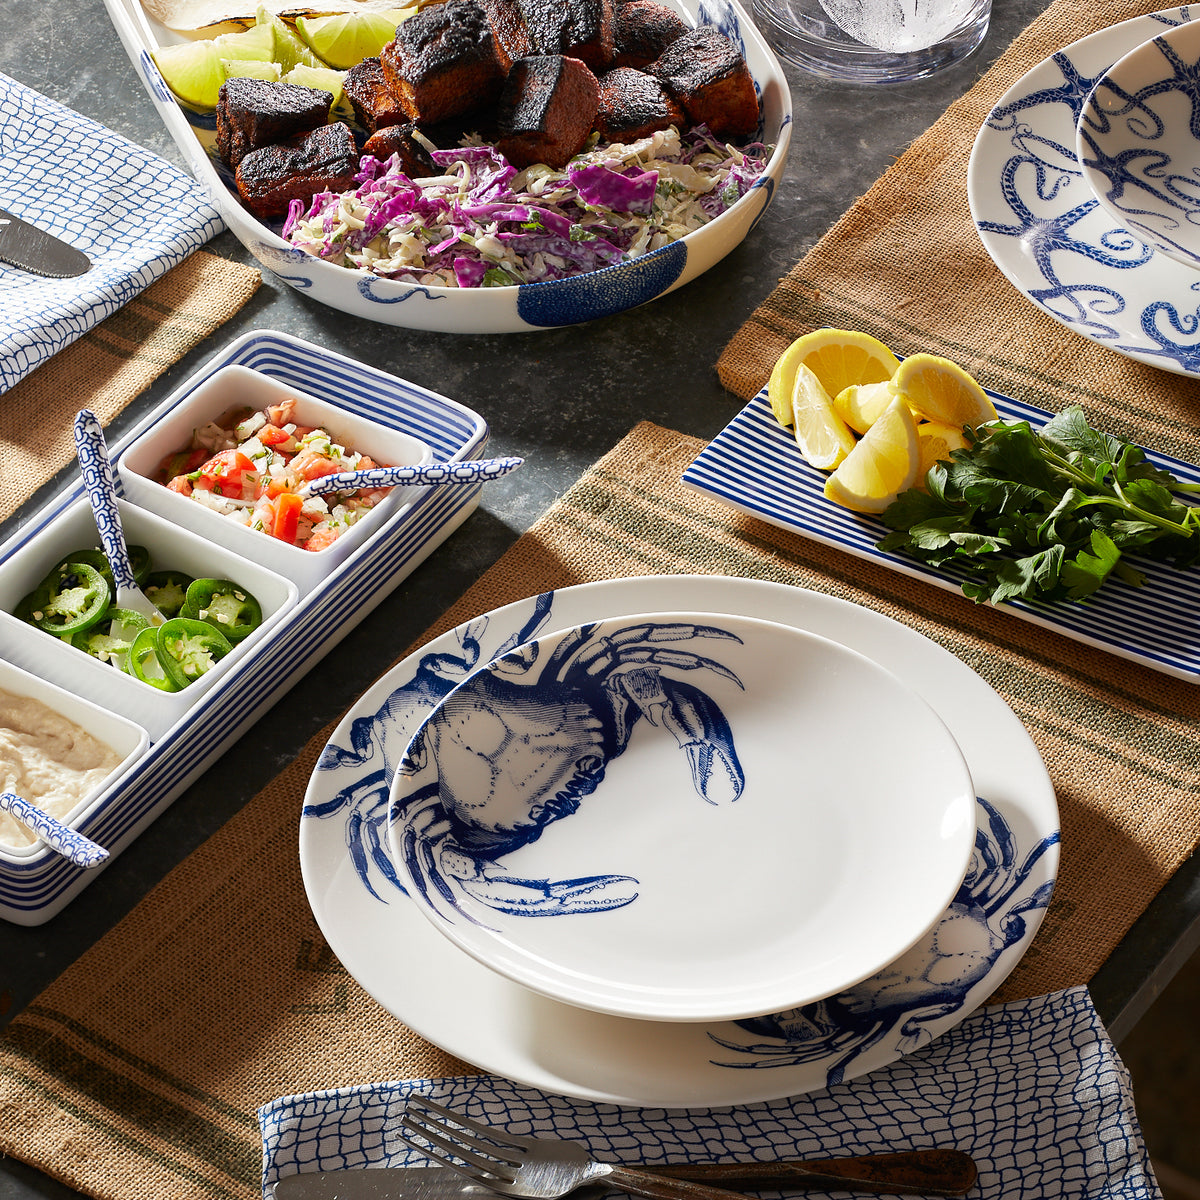 The table setting features blue and white Crab Coupe Salad Plates Blue and bowls, with accent plates adorned with a crab motif from the Caskata Artisanal Home brand.